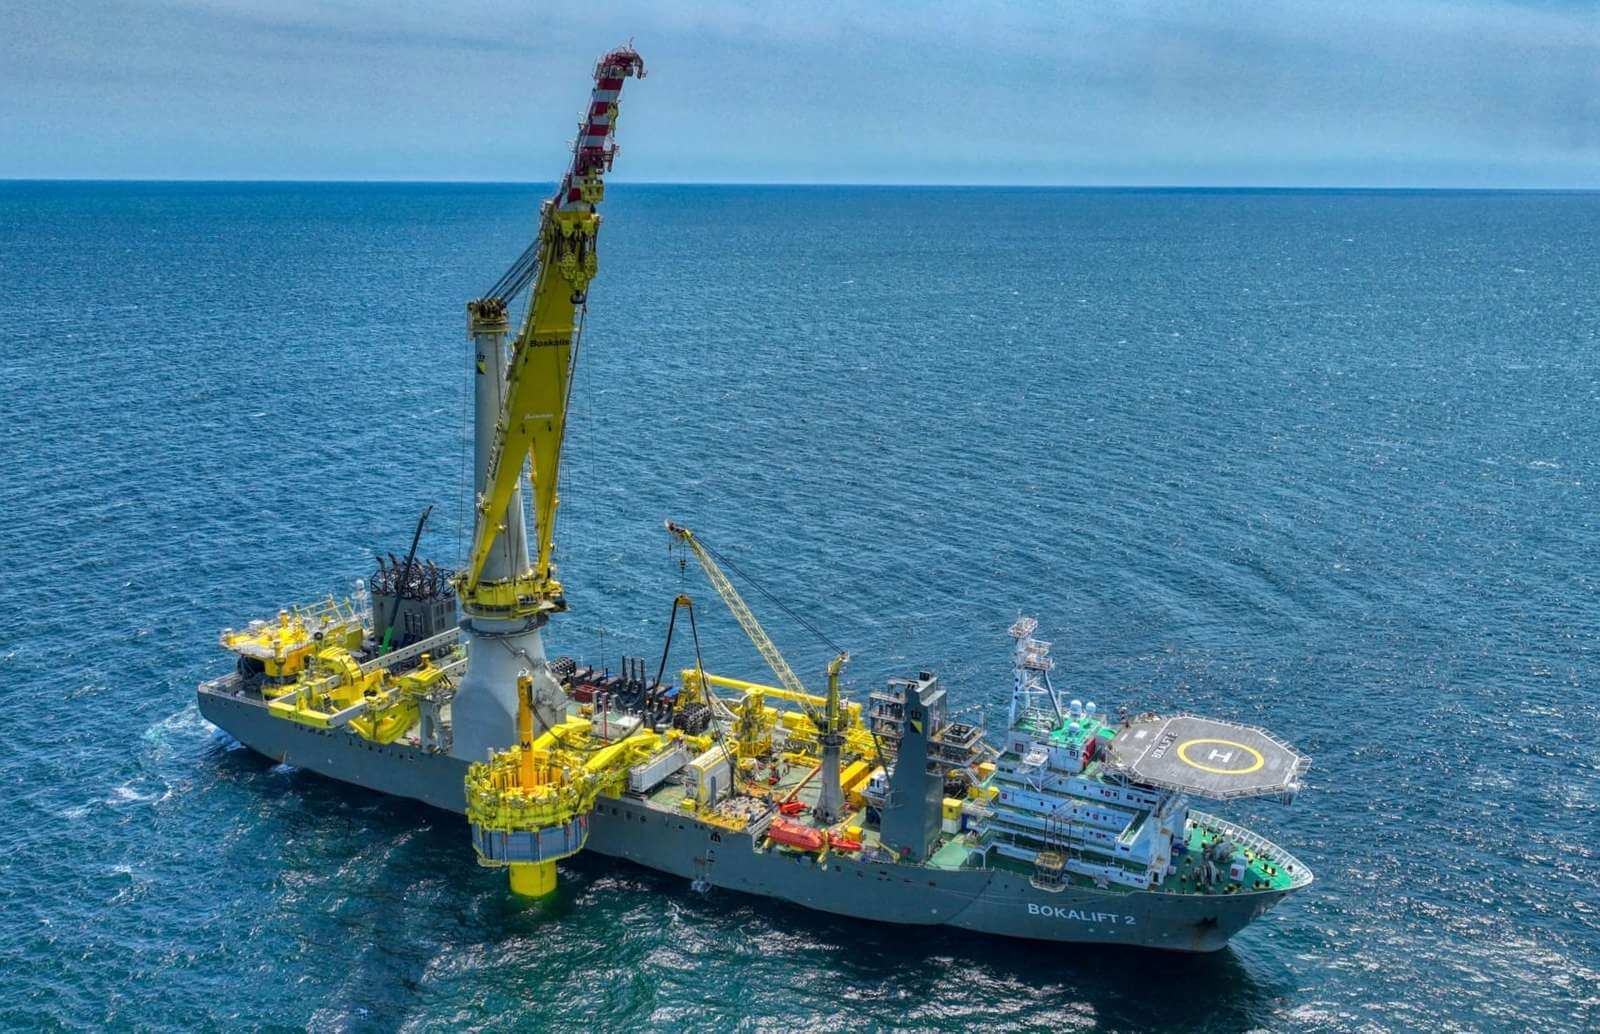 South Fork Wind monopile foundations were laid in the Atlantic this summer offshore wind farm